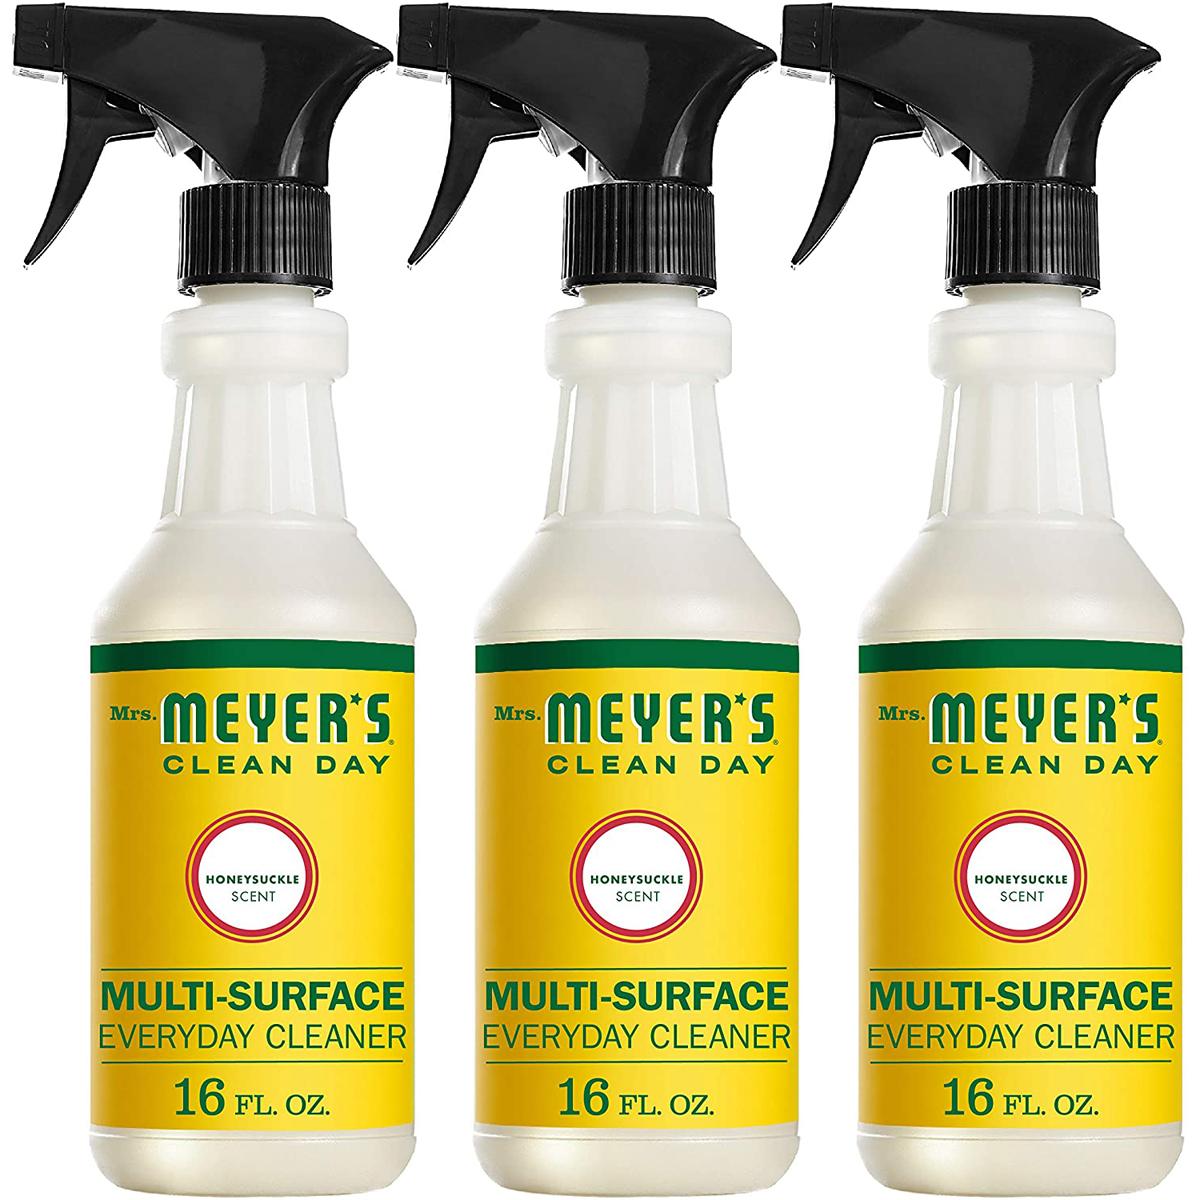 3 Mrs Meyers Clean Day Multi-Surface Everyday Cleaner for $7.58 Shipped